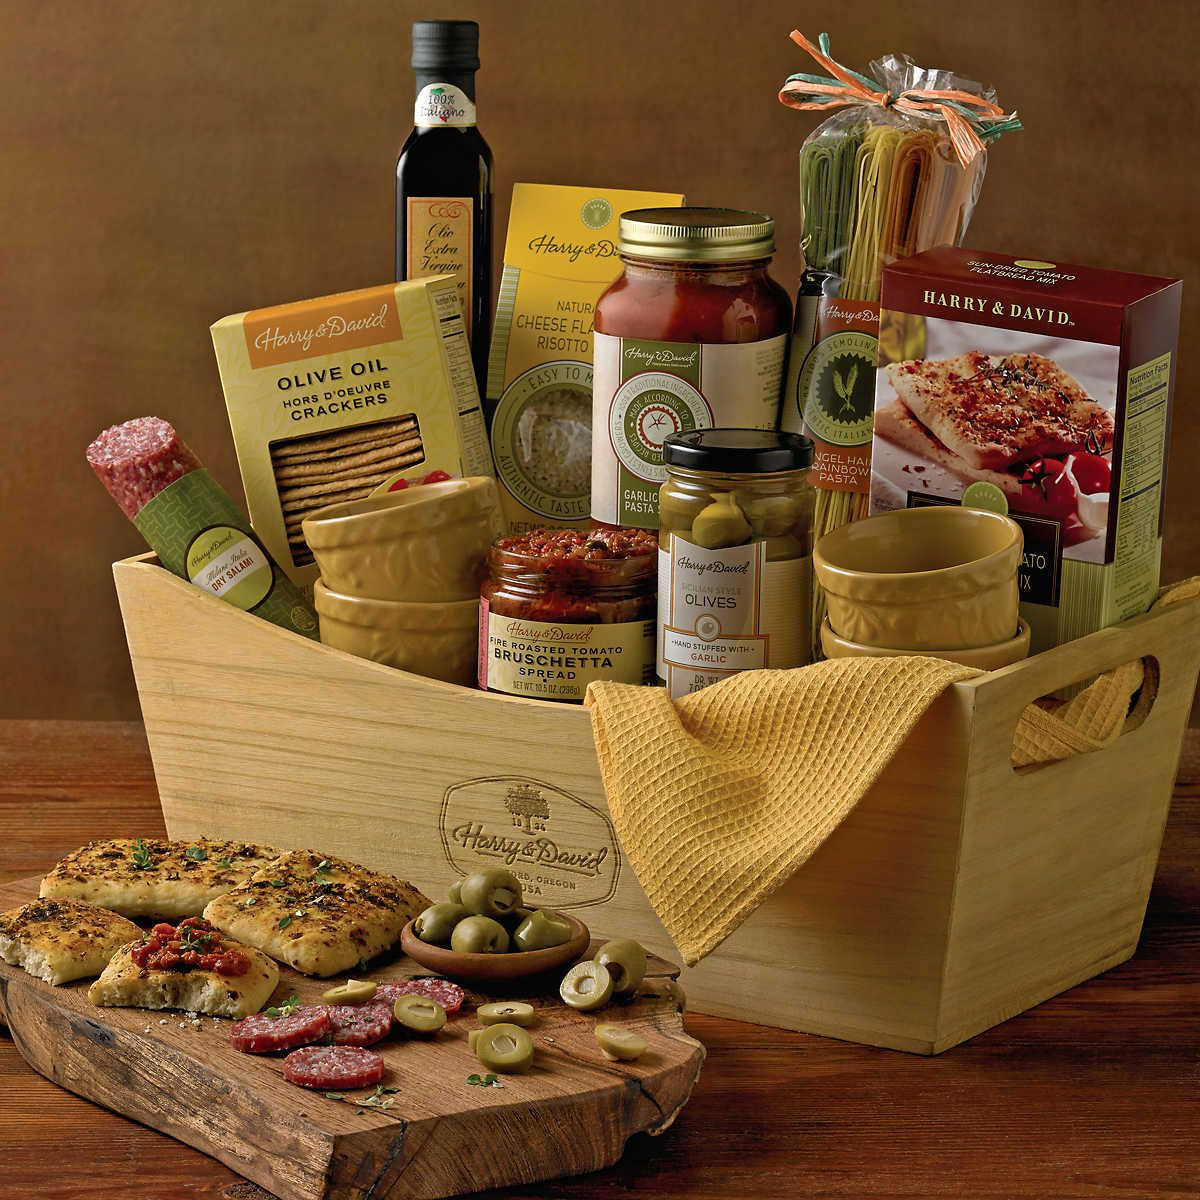 22 Of the Best Ideas for Italian Gift Baskets Ideas Home, Family